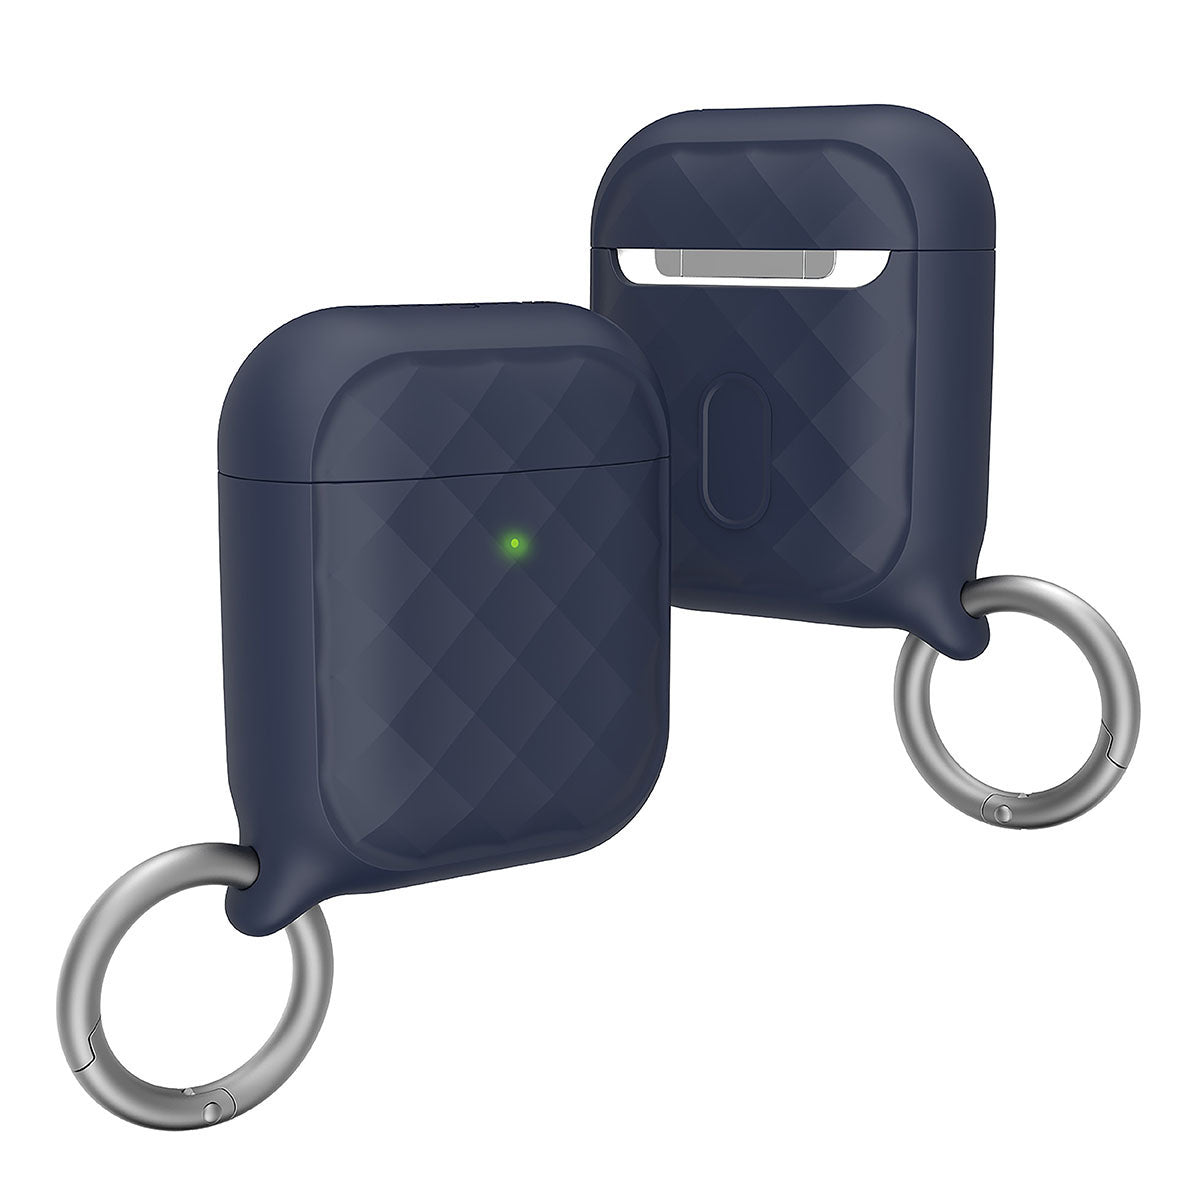 Catalyst airpods gen2/1 case eing clip carabiner showing the front and back of the case with ring clip carabiner attached